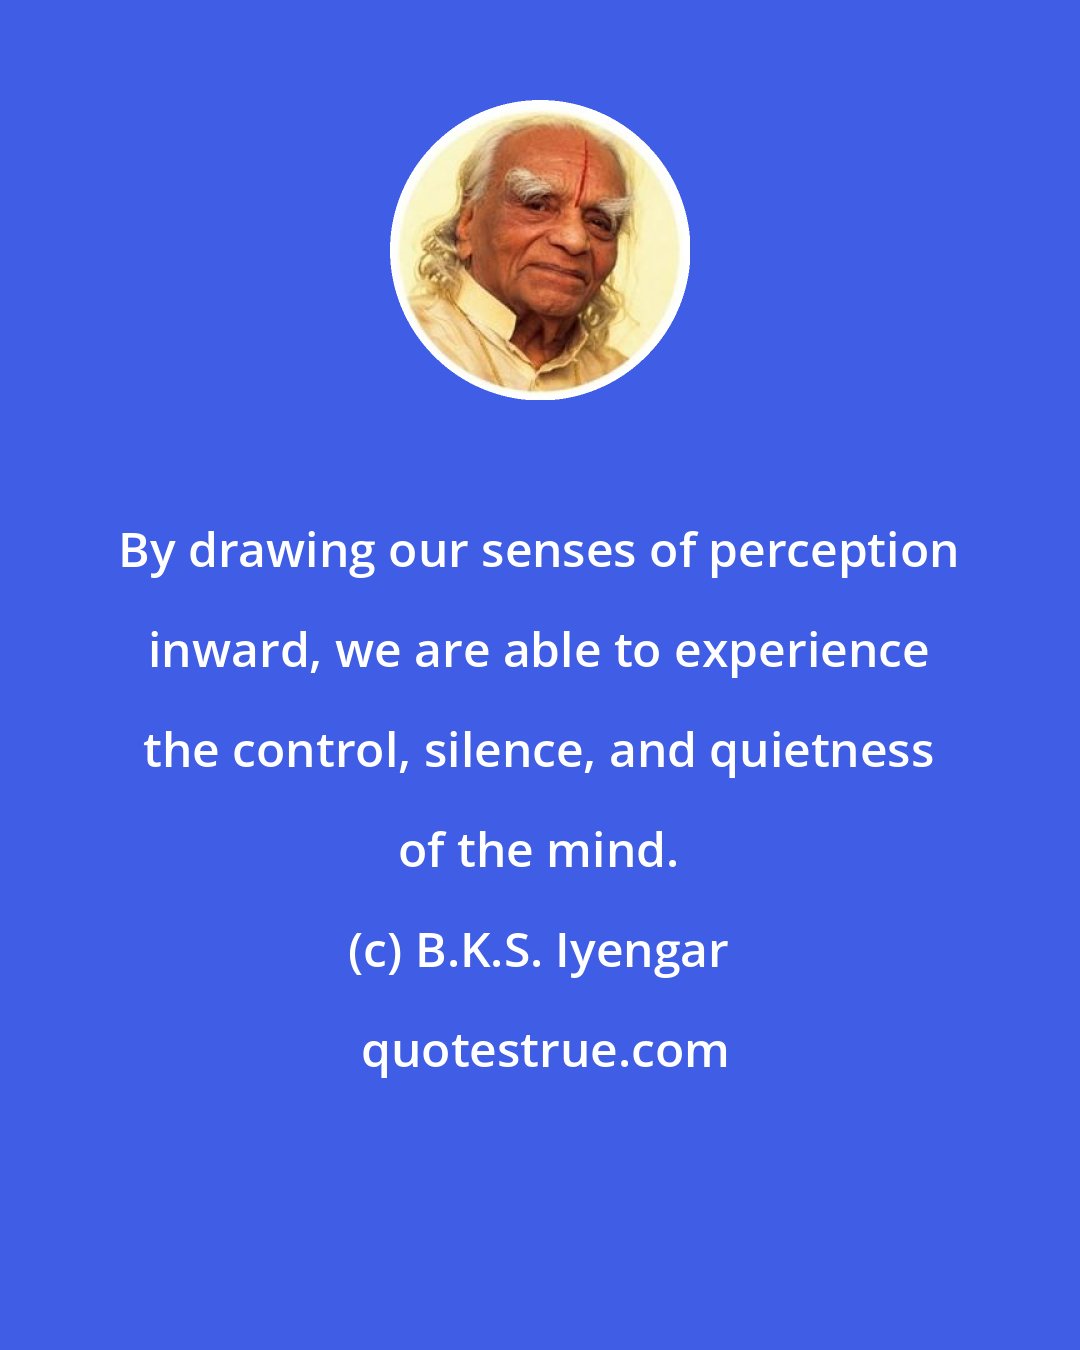 B.K.S. Iyengar: By drawing our senses of perception inward, we are able to experience the control, silence, and quietness of the mind.